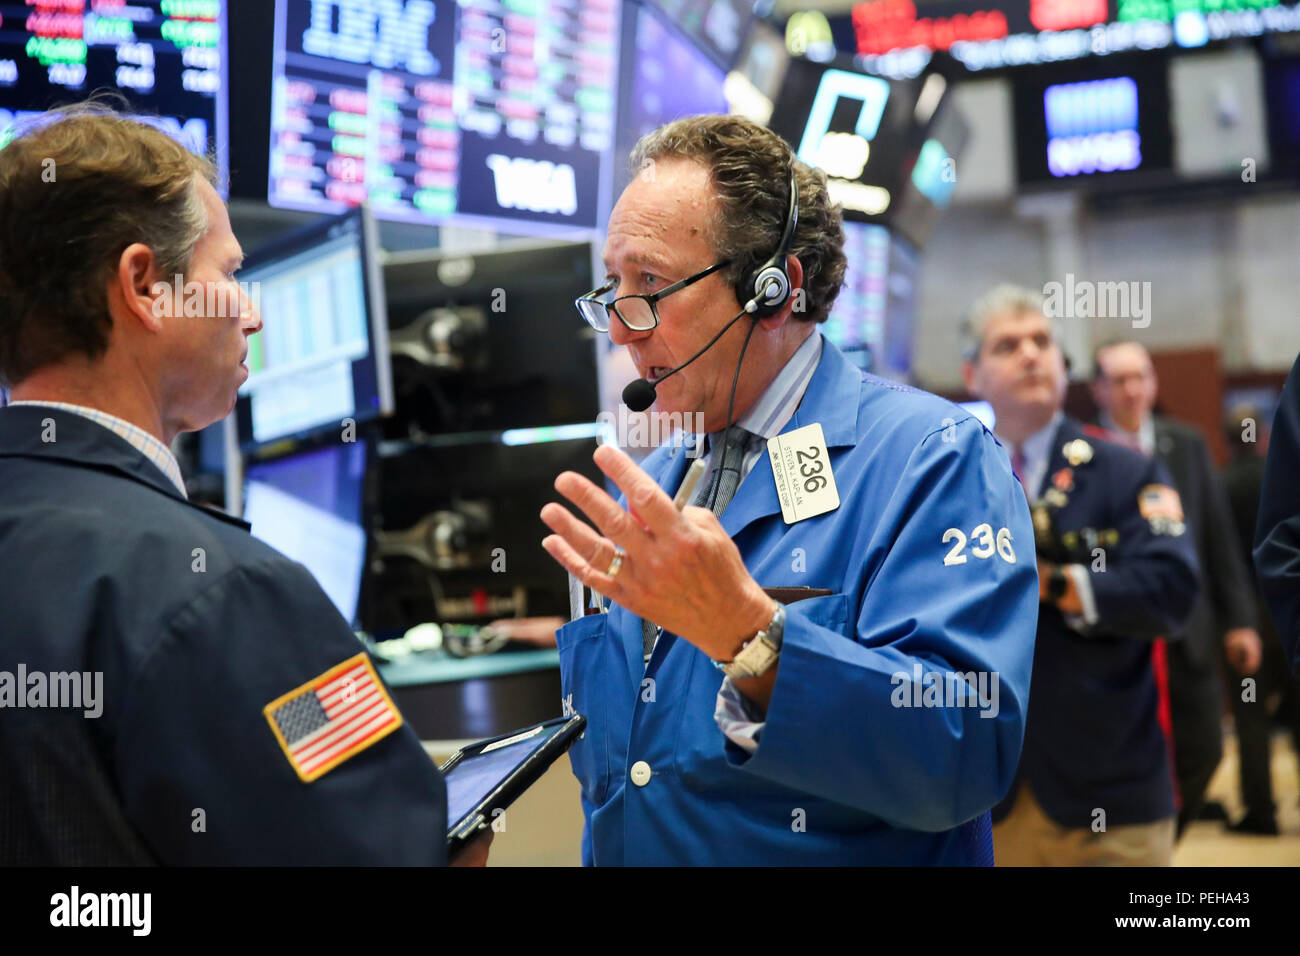 New York, USA. 15th Aug, 2018. Traders work at the New York Stock Exchange in New York, the United States, on Aug. 15, 2018. U.S. stocks closed lower on Wednesday. The Dow Jones Industrial Average fell 137.51 points, or 0.54 percent, to 25,162.41. The S&P 500 was down 21.59 points, or 0.76 percent, to 2,818.37. The Nasdaq Composite Index dropped 96.78 points, or 1.23 percent, to 7,774.12. Credit: Wang Ying/Xinhua/Alamy Live News Stock Photo